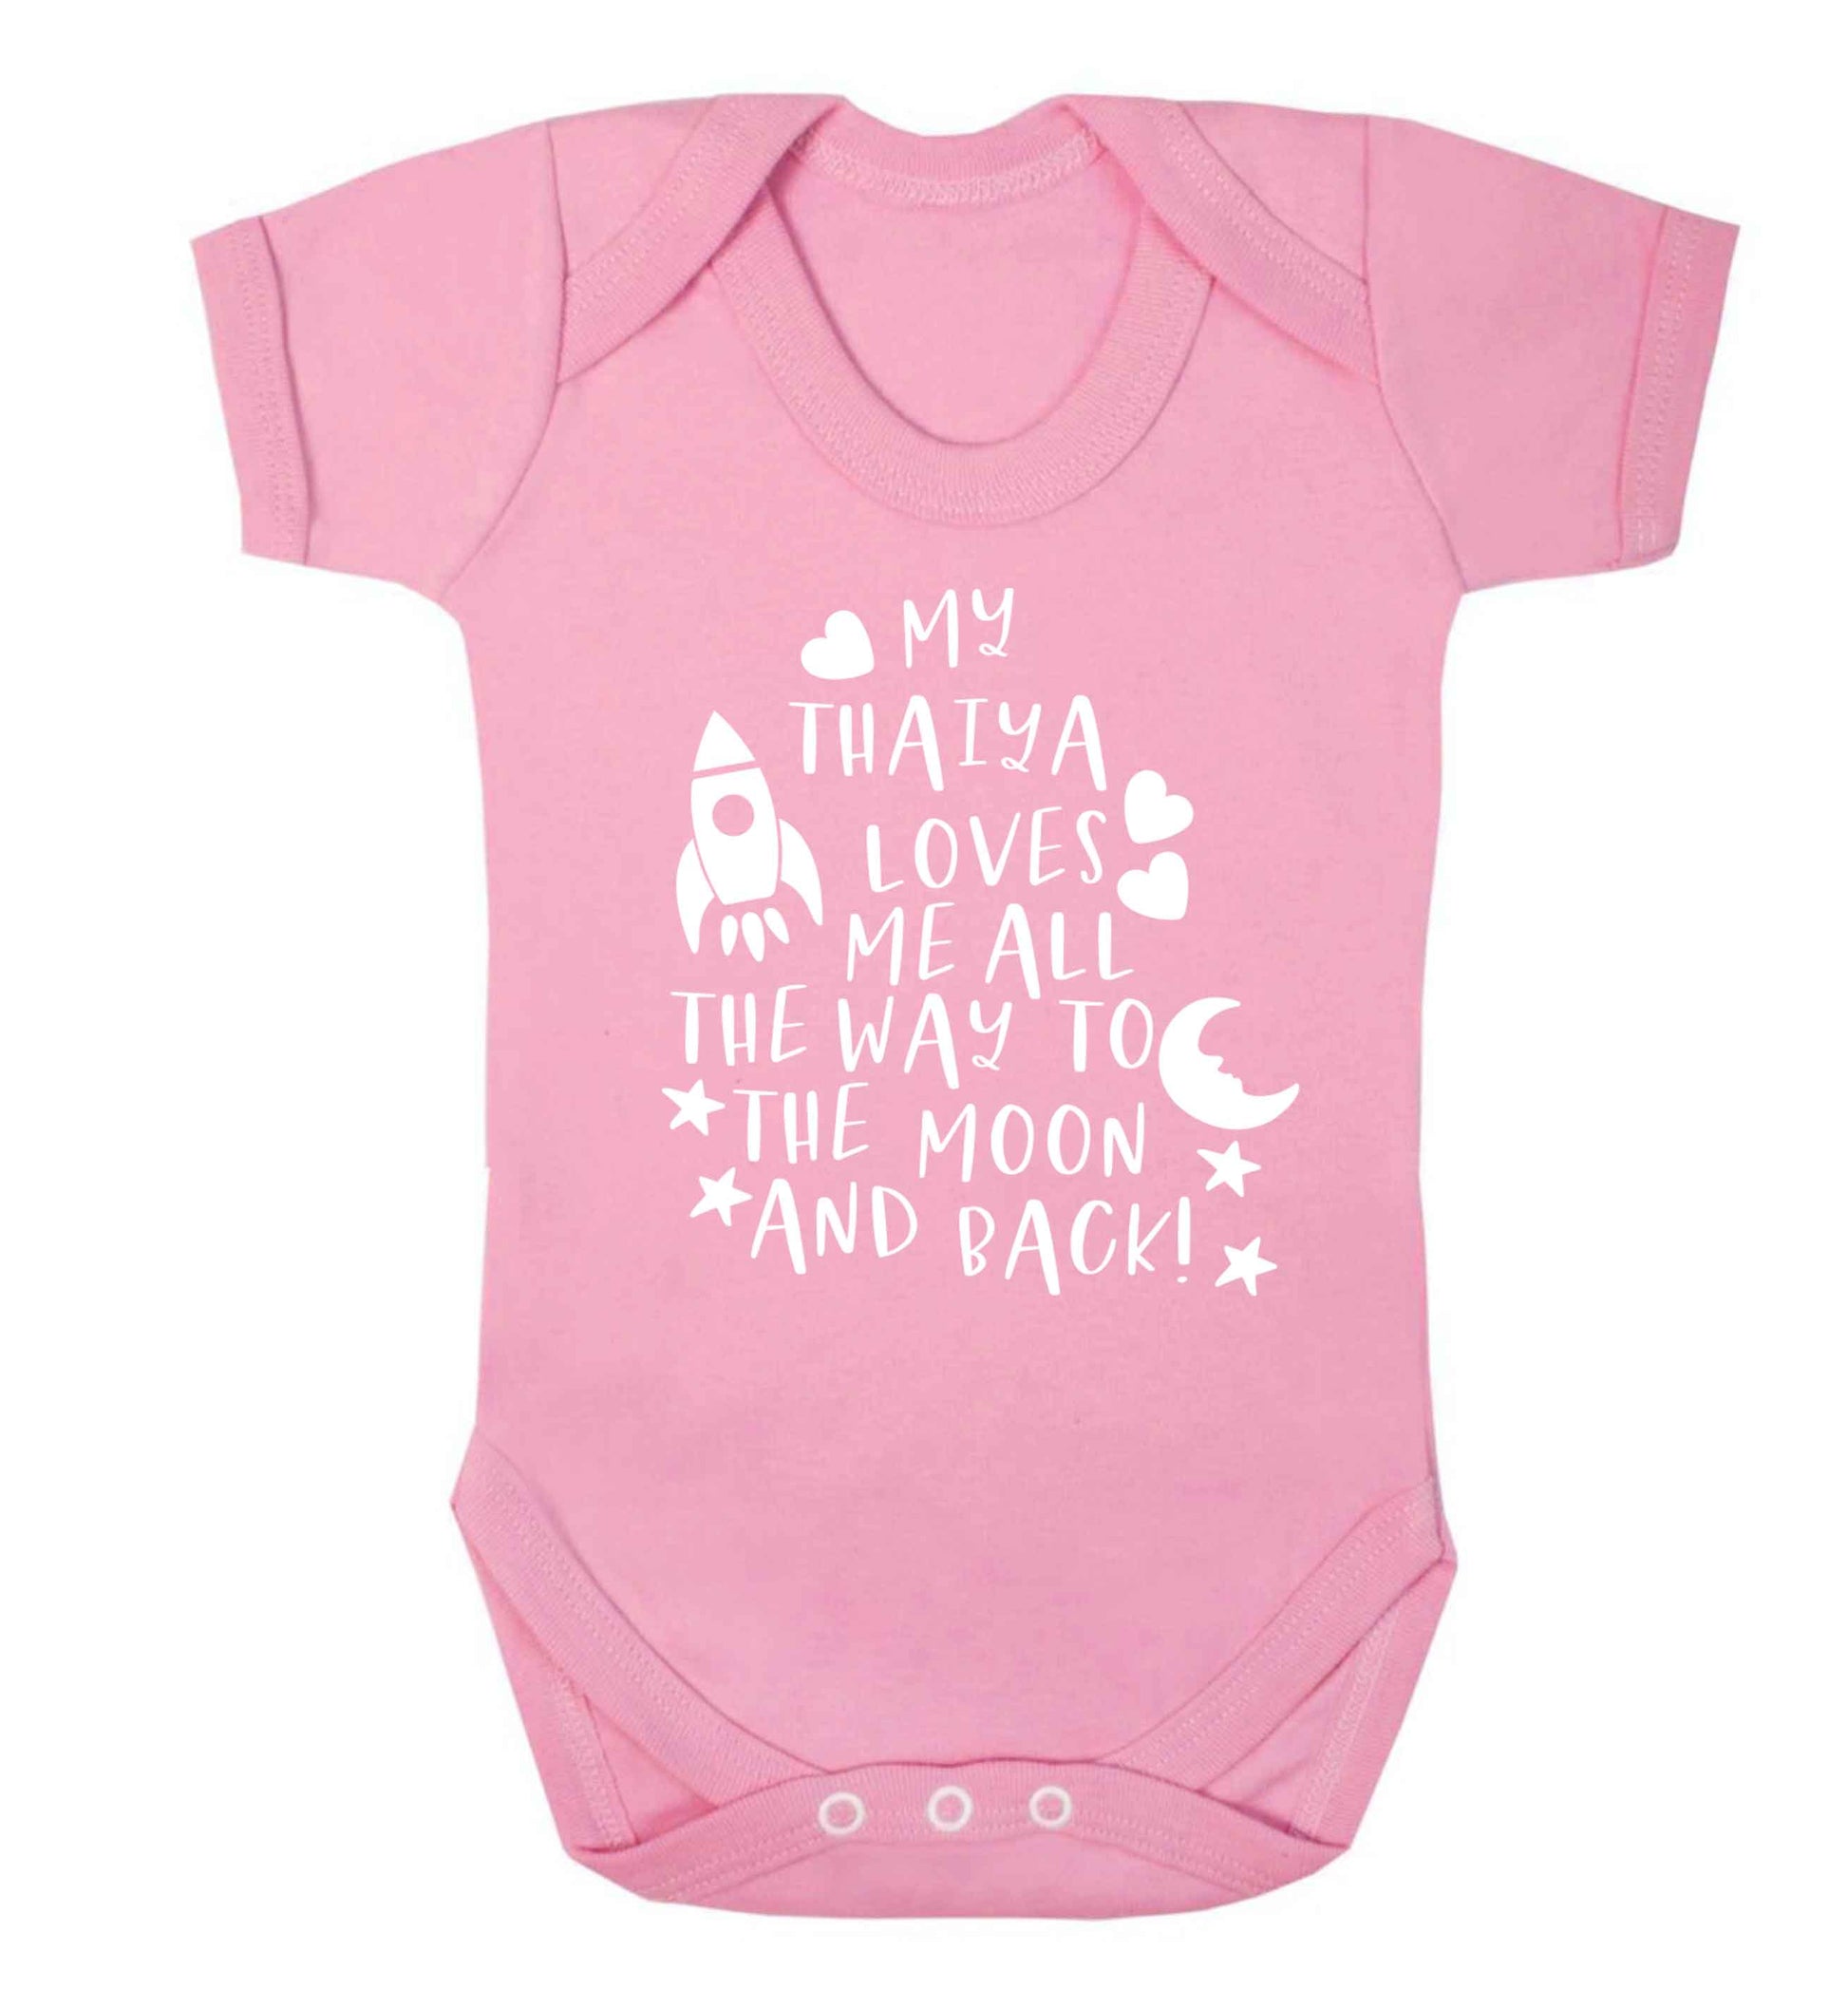 My thaiya loves me all the way to the moon and back Baby Vest pale pink 18-24 months